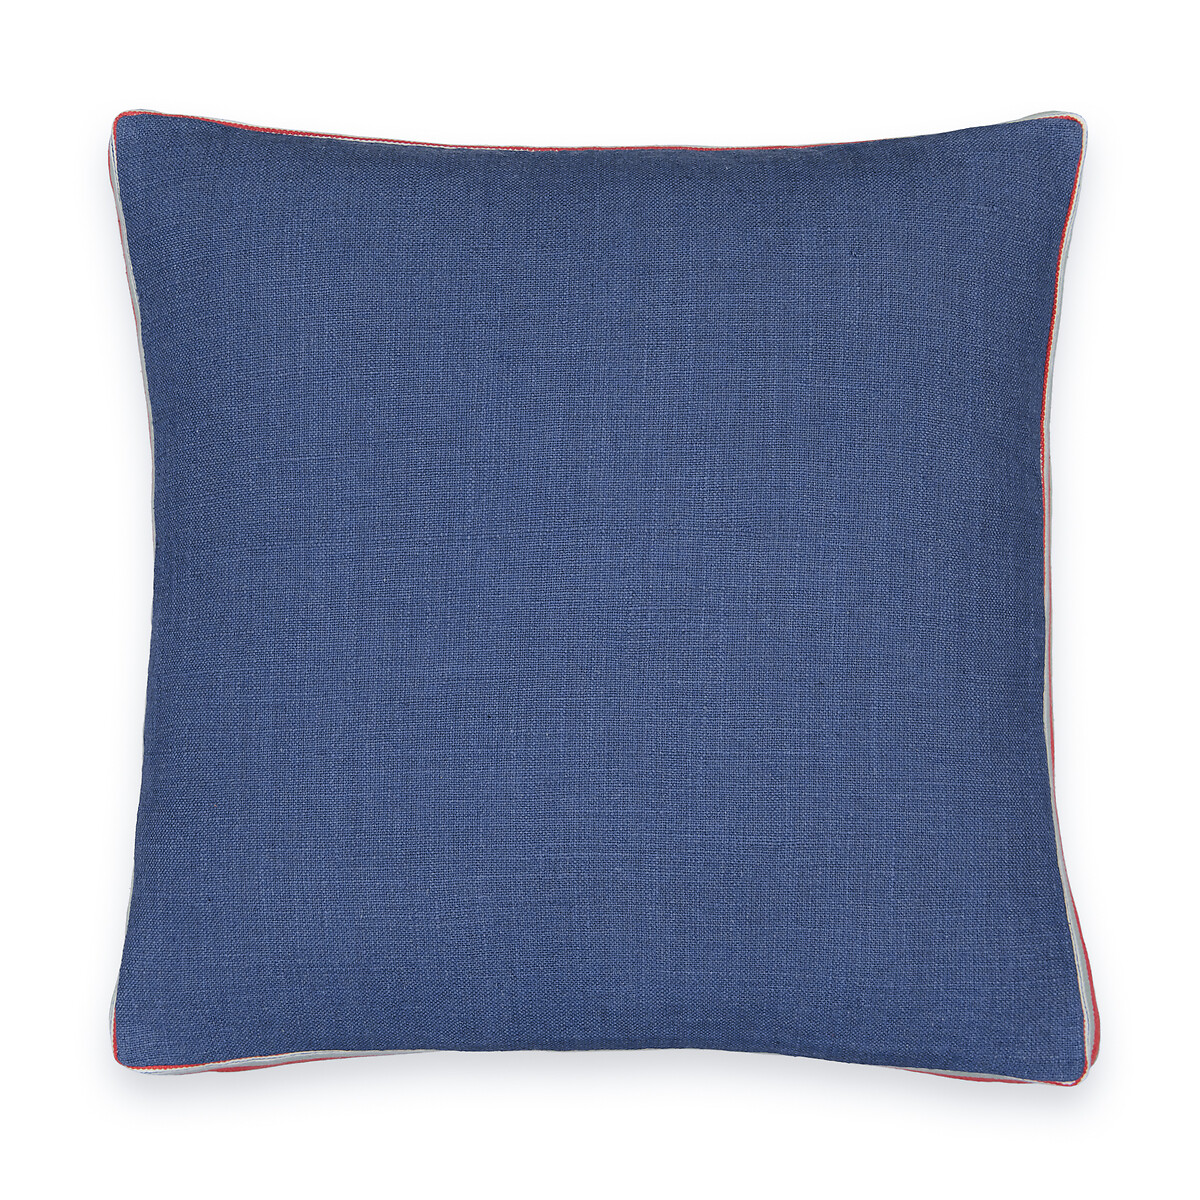 Finistere Square Two-Tone 100% Textured Cotton Cushion Cover